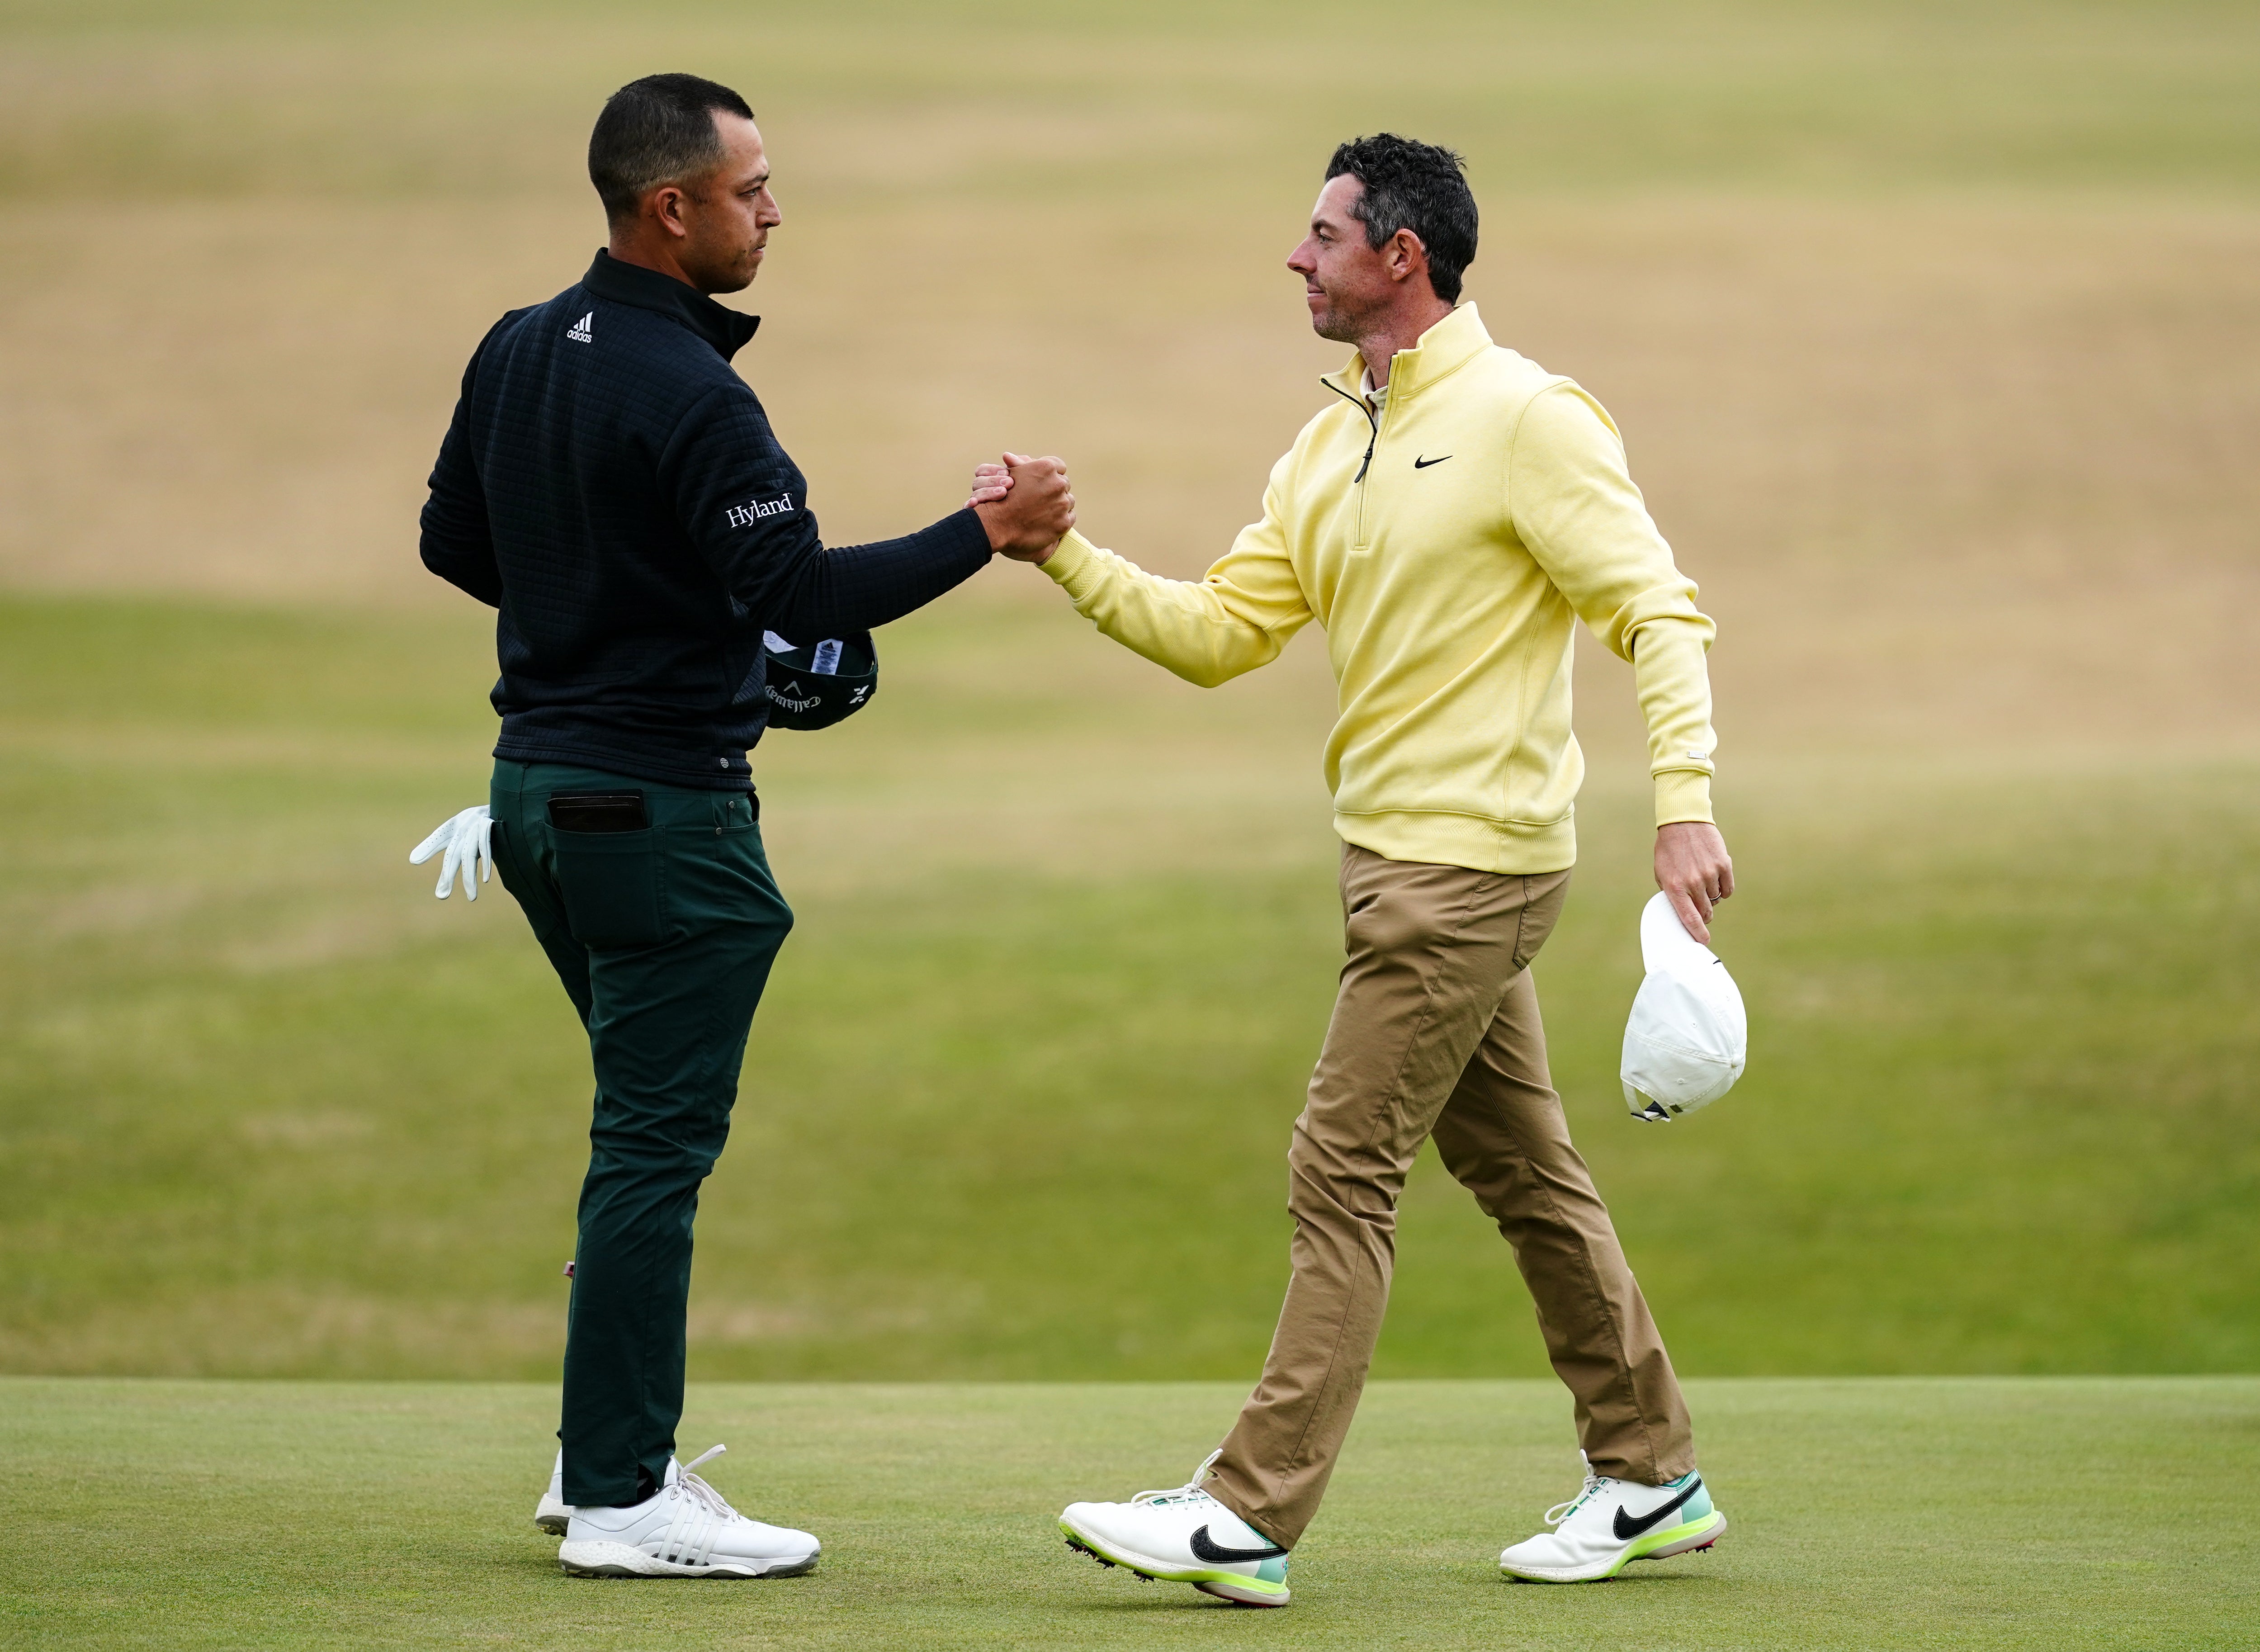 Xander Schauffele (left) and Rory McIlroy after finishing their opening rounds in the 150th Open Championship (David Davies/PA)